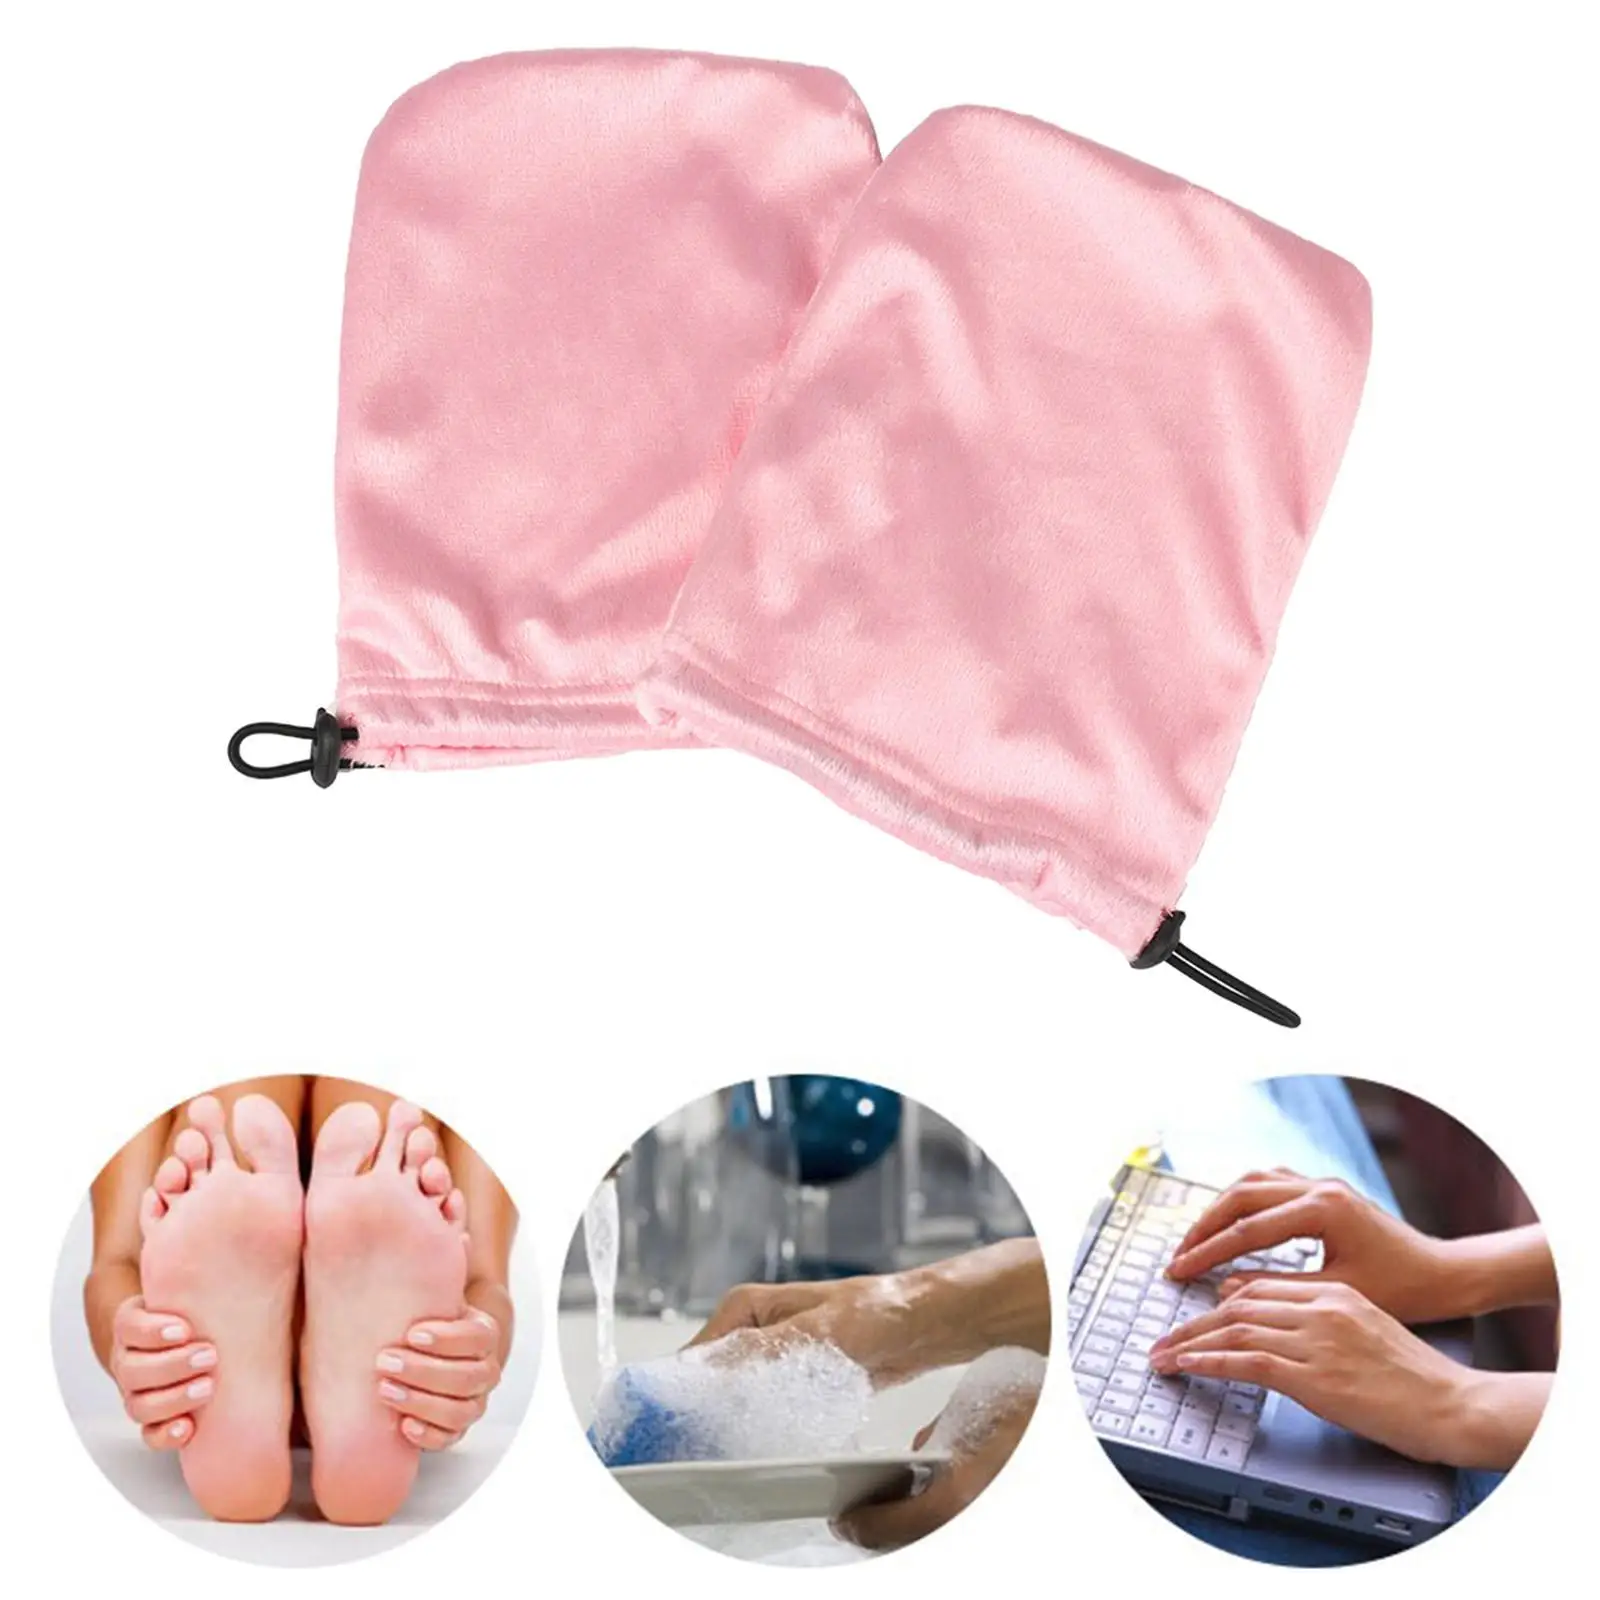 2 Pieces Paraffin Wax Mitts for Hand and Feet Skin Care Heat Wax Mitten Infrared Machine Keep Warm Wax Booties Nail Art Tools